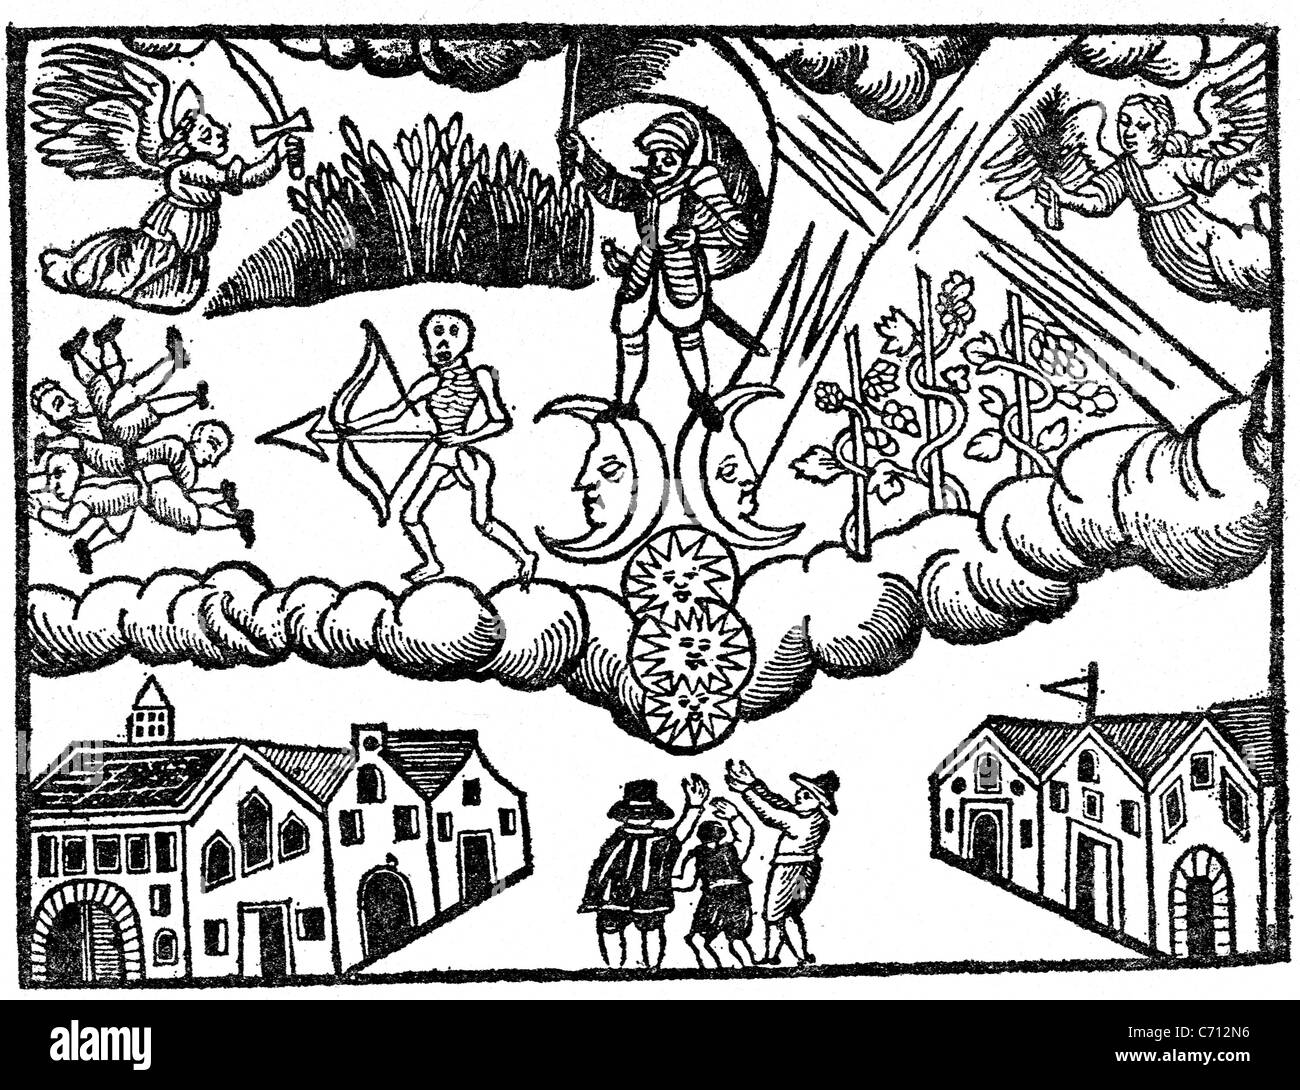 THIRTY YEARS WAR (1618-1648)  A 1627 pamphlet shows the terror of war: sun hidden by clouds, corpses,crop destruction Stock Photo